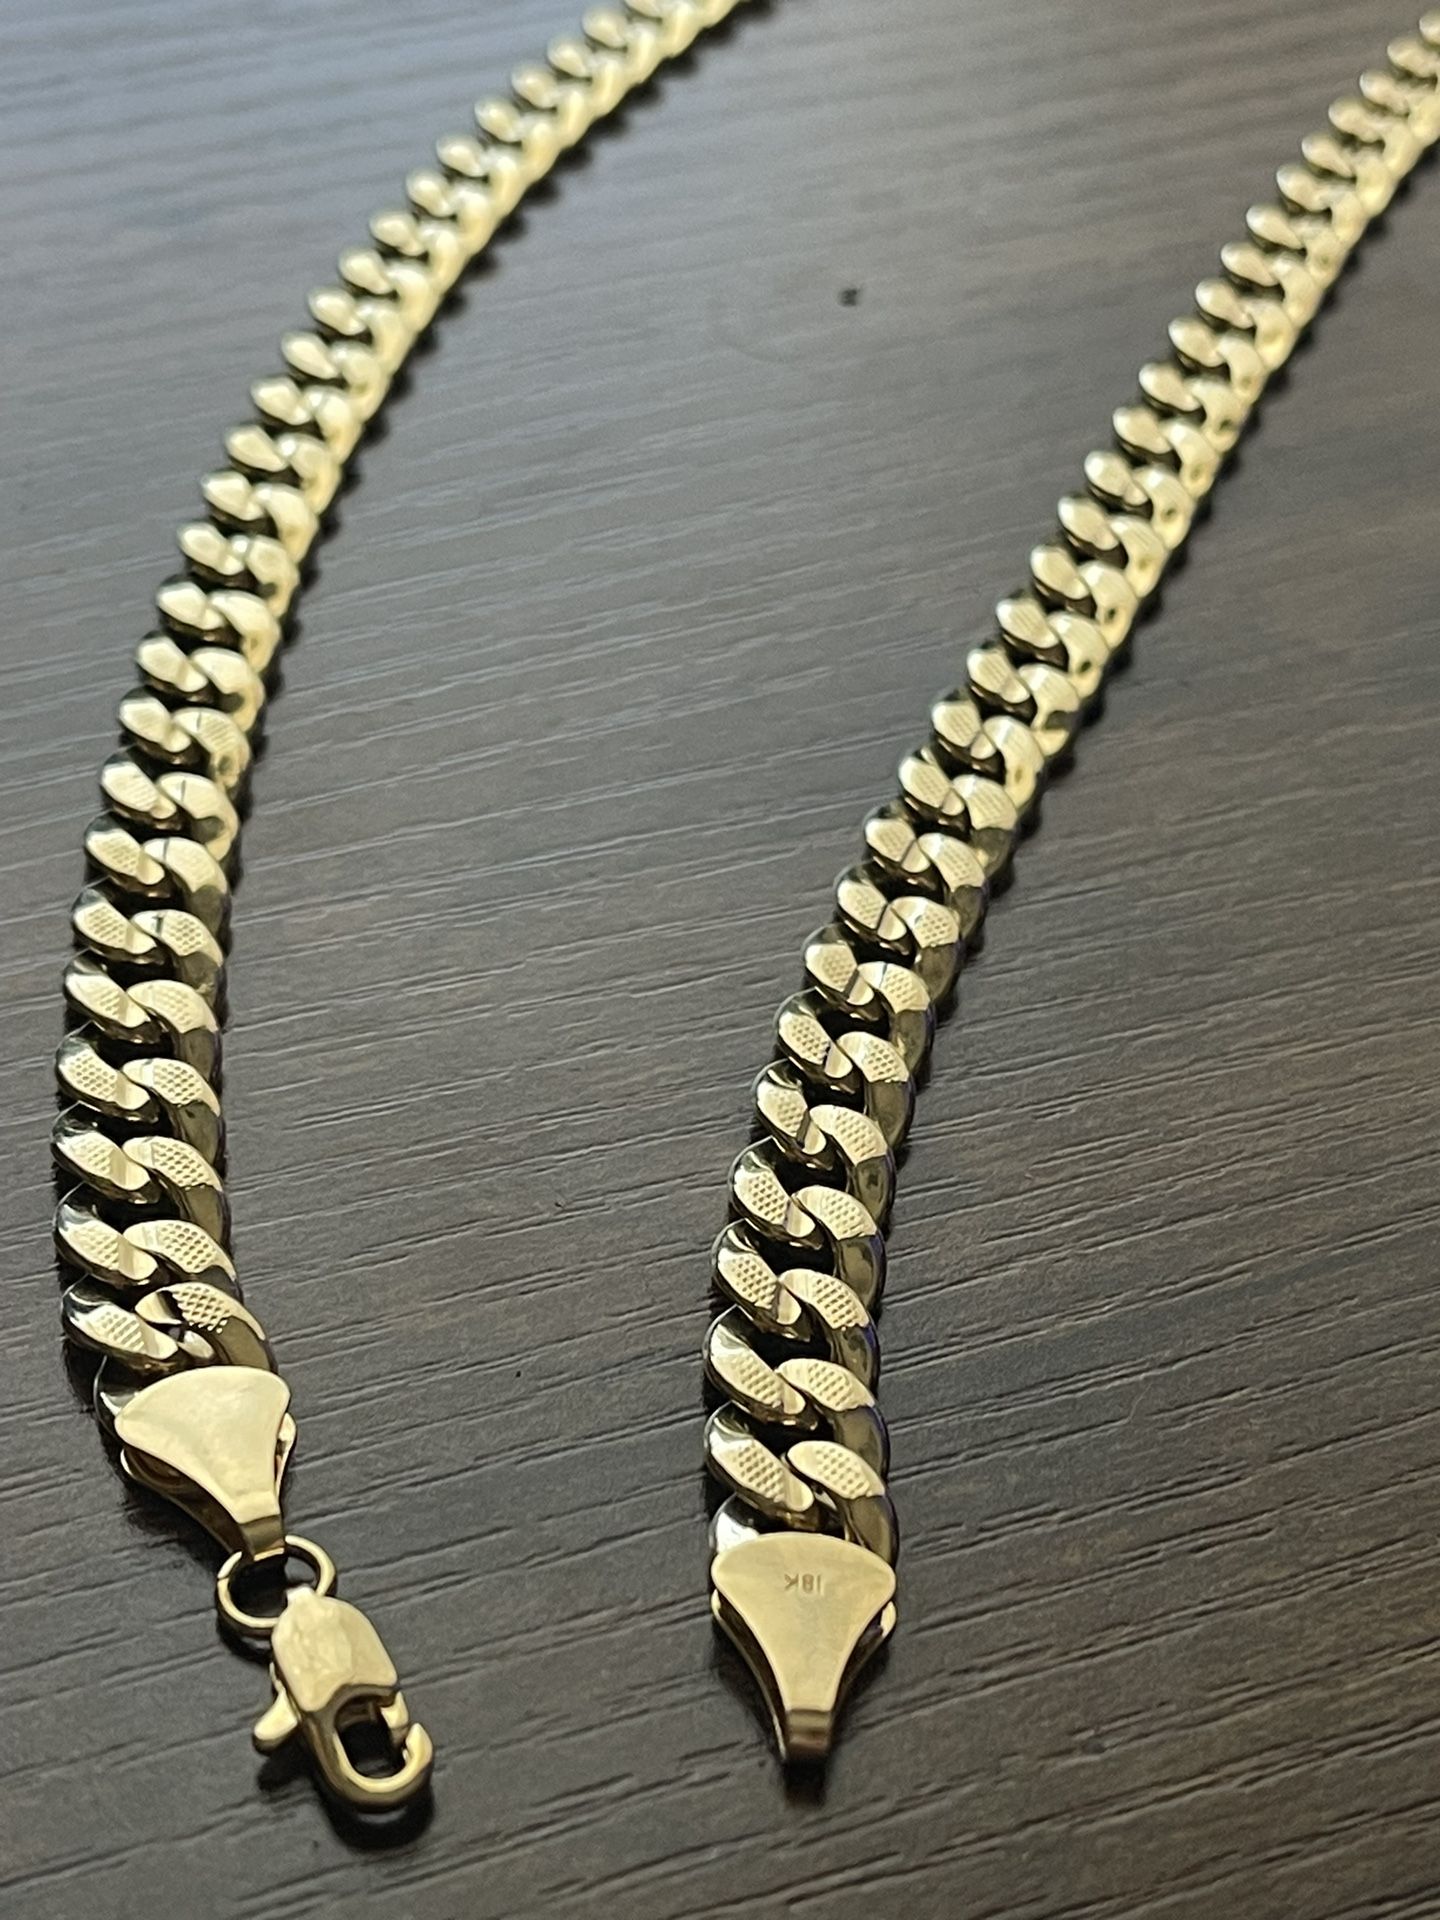 18K Gold Plated 24” Miami Cuban Link Chain 